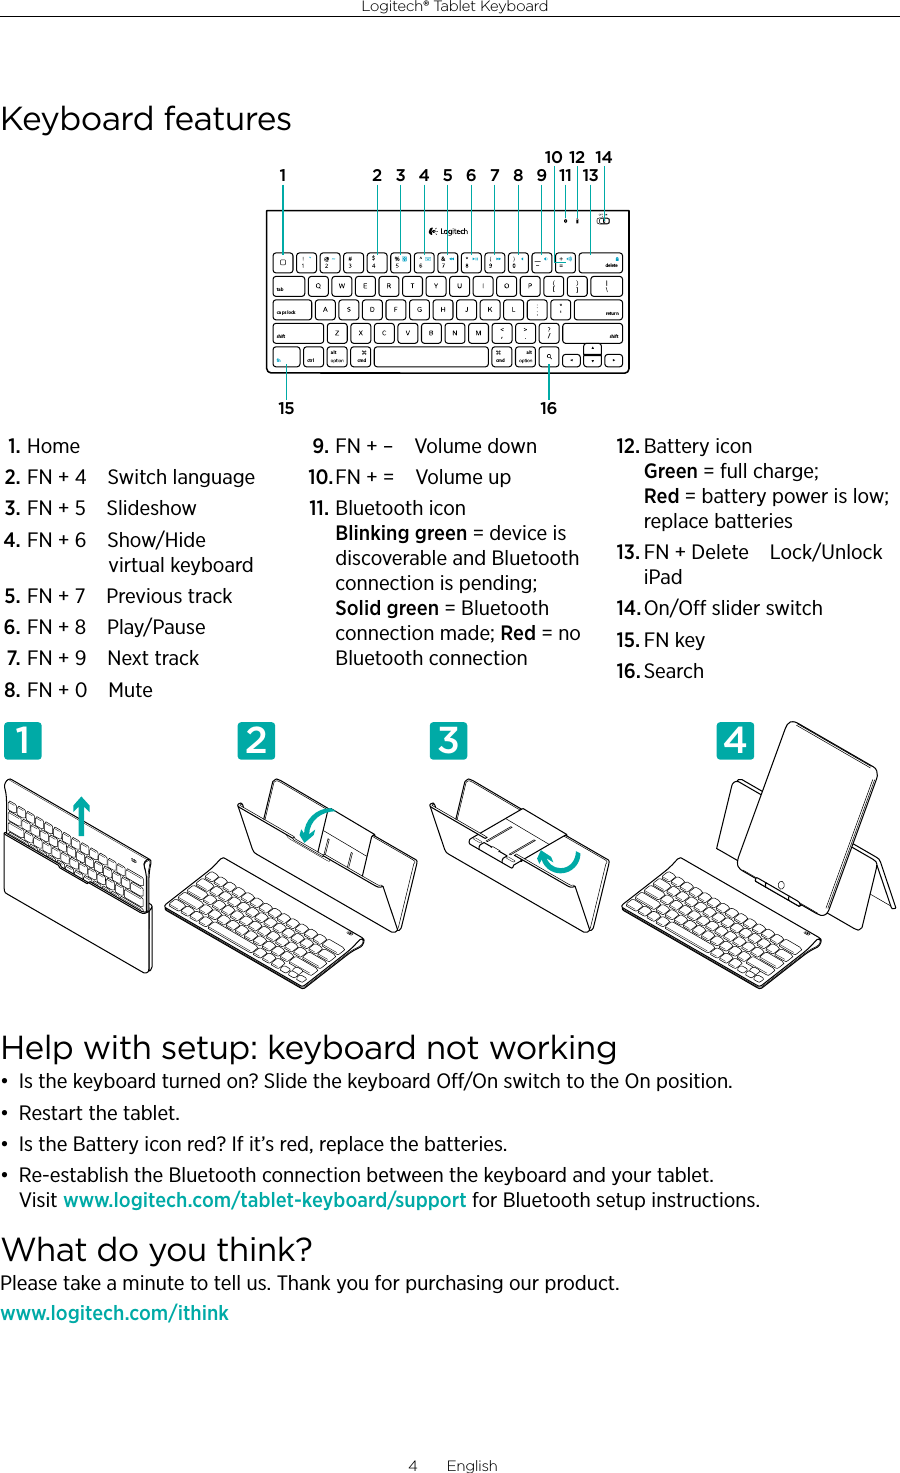 Logitech® Tablet Keyboard4  English1. Home2. FN + 4 Switch language3. FN + 5 Slideshow4. FN + 6 Show/Hide  virtual keyboard5. FN + 7 Previous track6. FN + 8 Play/Pause7. FN + 9 Next track8. FN + 0 Mute9. FN + – Volume down10. FN + = Volume up11. Bluetooth icon  Blinking green = device is discoverable and Bluetooth connection is pending; Solid green = Bluetooth connection made; Red = no Bluetooth connection12. Battery icon  Green = full charge; Red = battery power is low; replace batteries13. FN + Delete Lock/Unlock iPad14. On/O slider switch15. FN key16. SearchHelp with setup: keyboard not working• Is the keyboard turned on? Slide the keyboard O/On switch to the On position.• Restart the tablet.• Is the Battery icon red? If it’s red, replace the batteries.• Re-establish the Bluetooth connection between the keyboard and your tablet. Visit www.logitech.com/tablet-keyboard/support for Bluetooth setup instructions.What do you think?Please take a minute to tell us. Thank you for purchasing our product.www.logitech.com/ithink11 2 3 4Keyboard features,/[[&amp;ctr lalt a lttabca ps lockshift shift$%retur ndeletecmd cmdfn1 215 16543 6 7 8 9 1112 141310